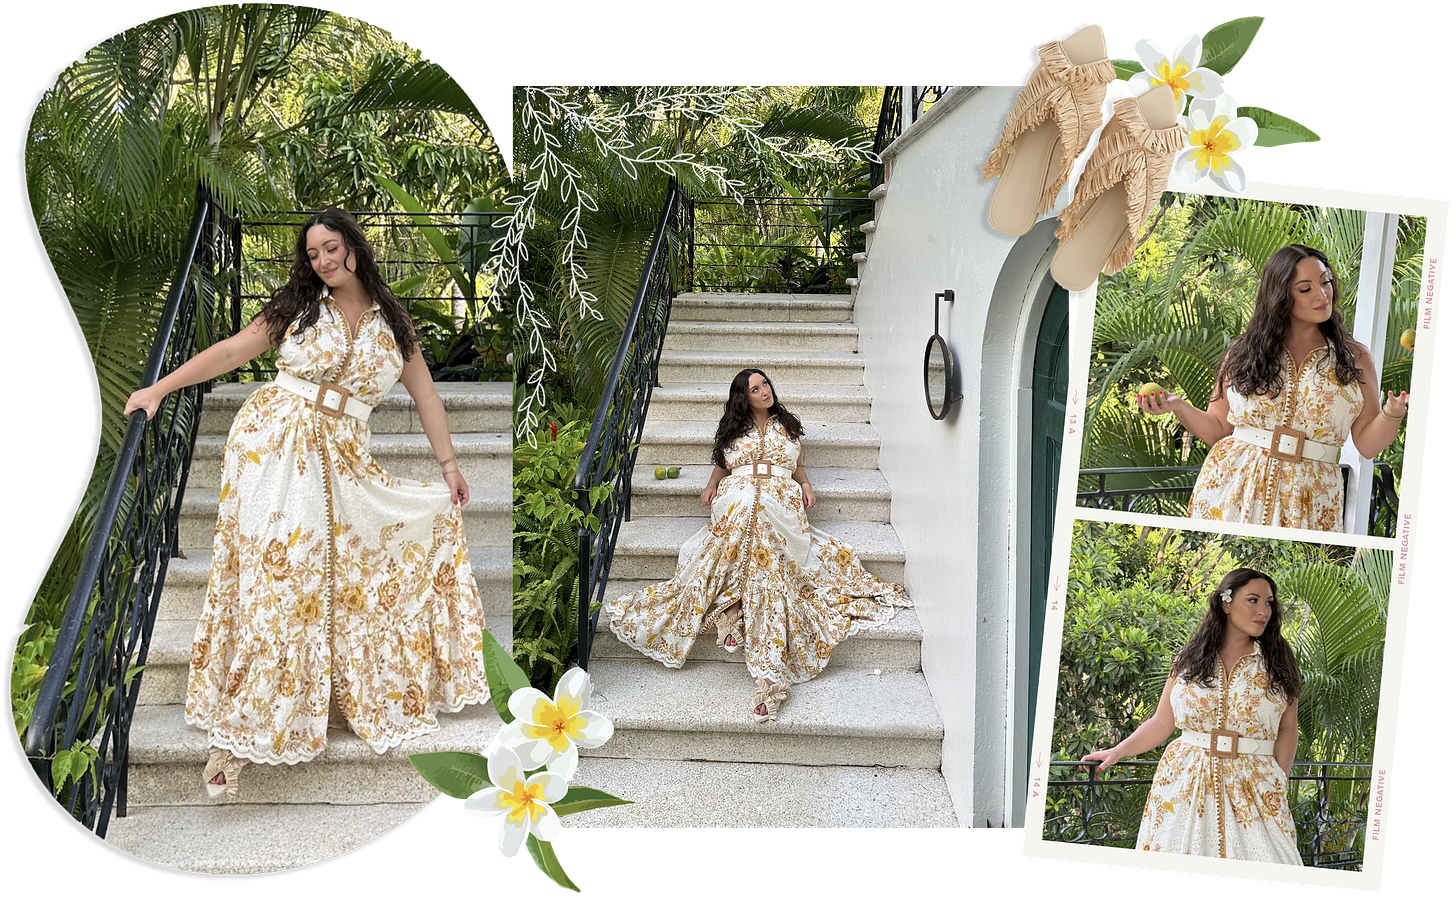 Images of Bella in a Hemant & Nandita yellow and white dress sitting on the steps of a Jamaican villa